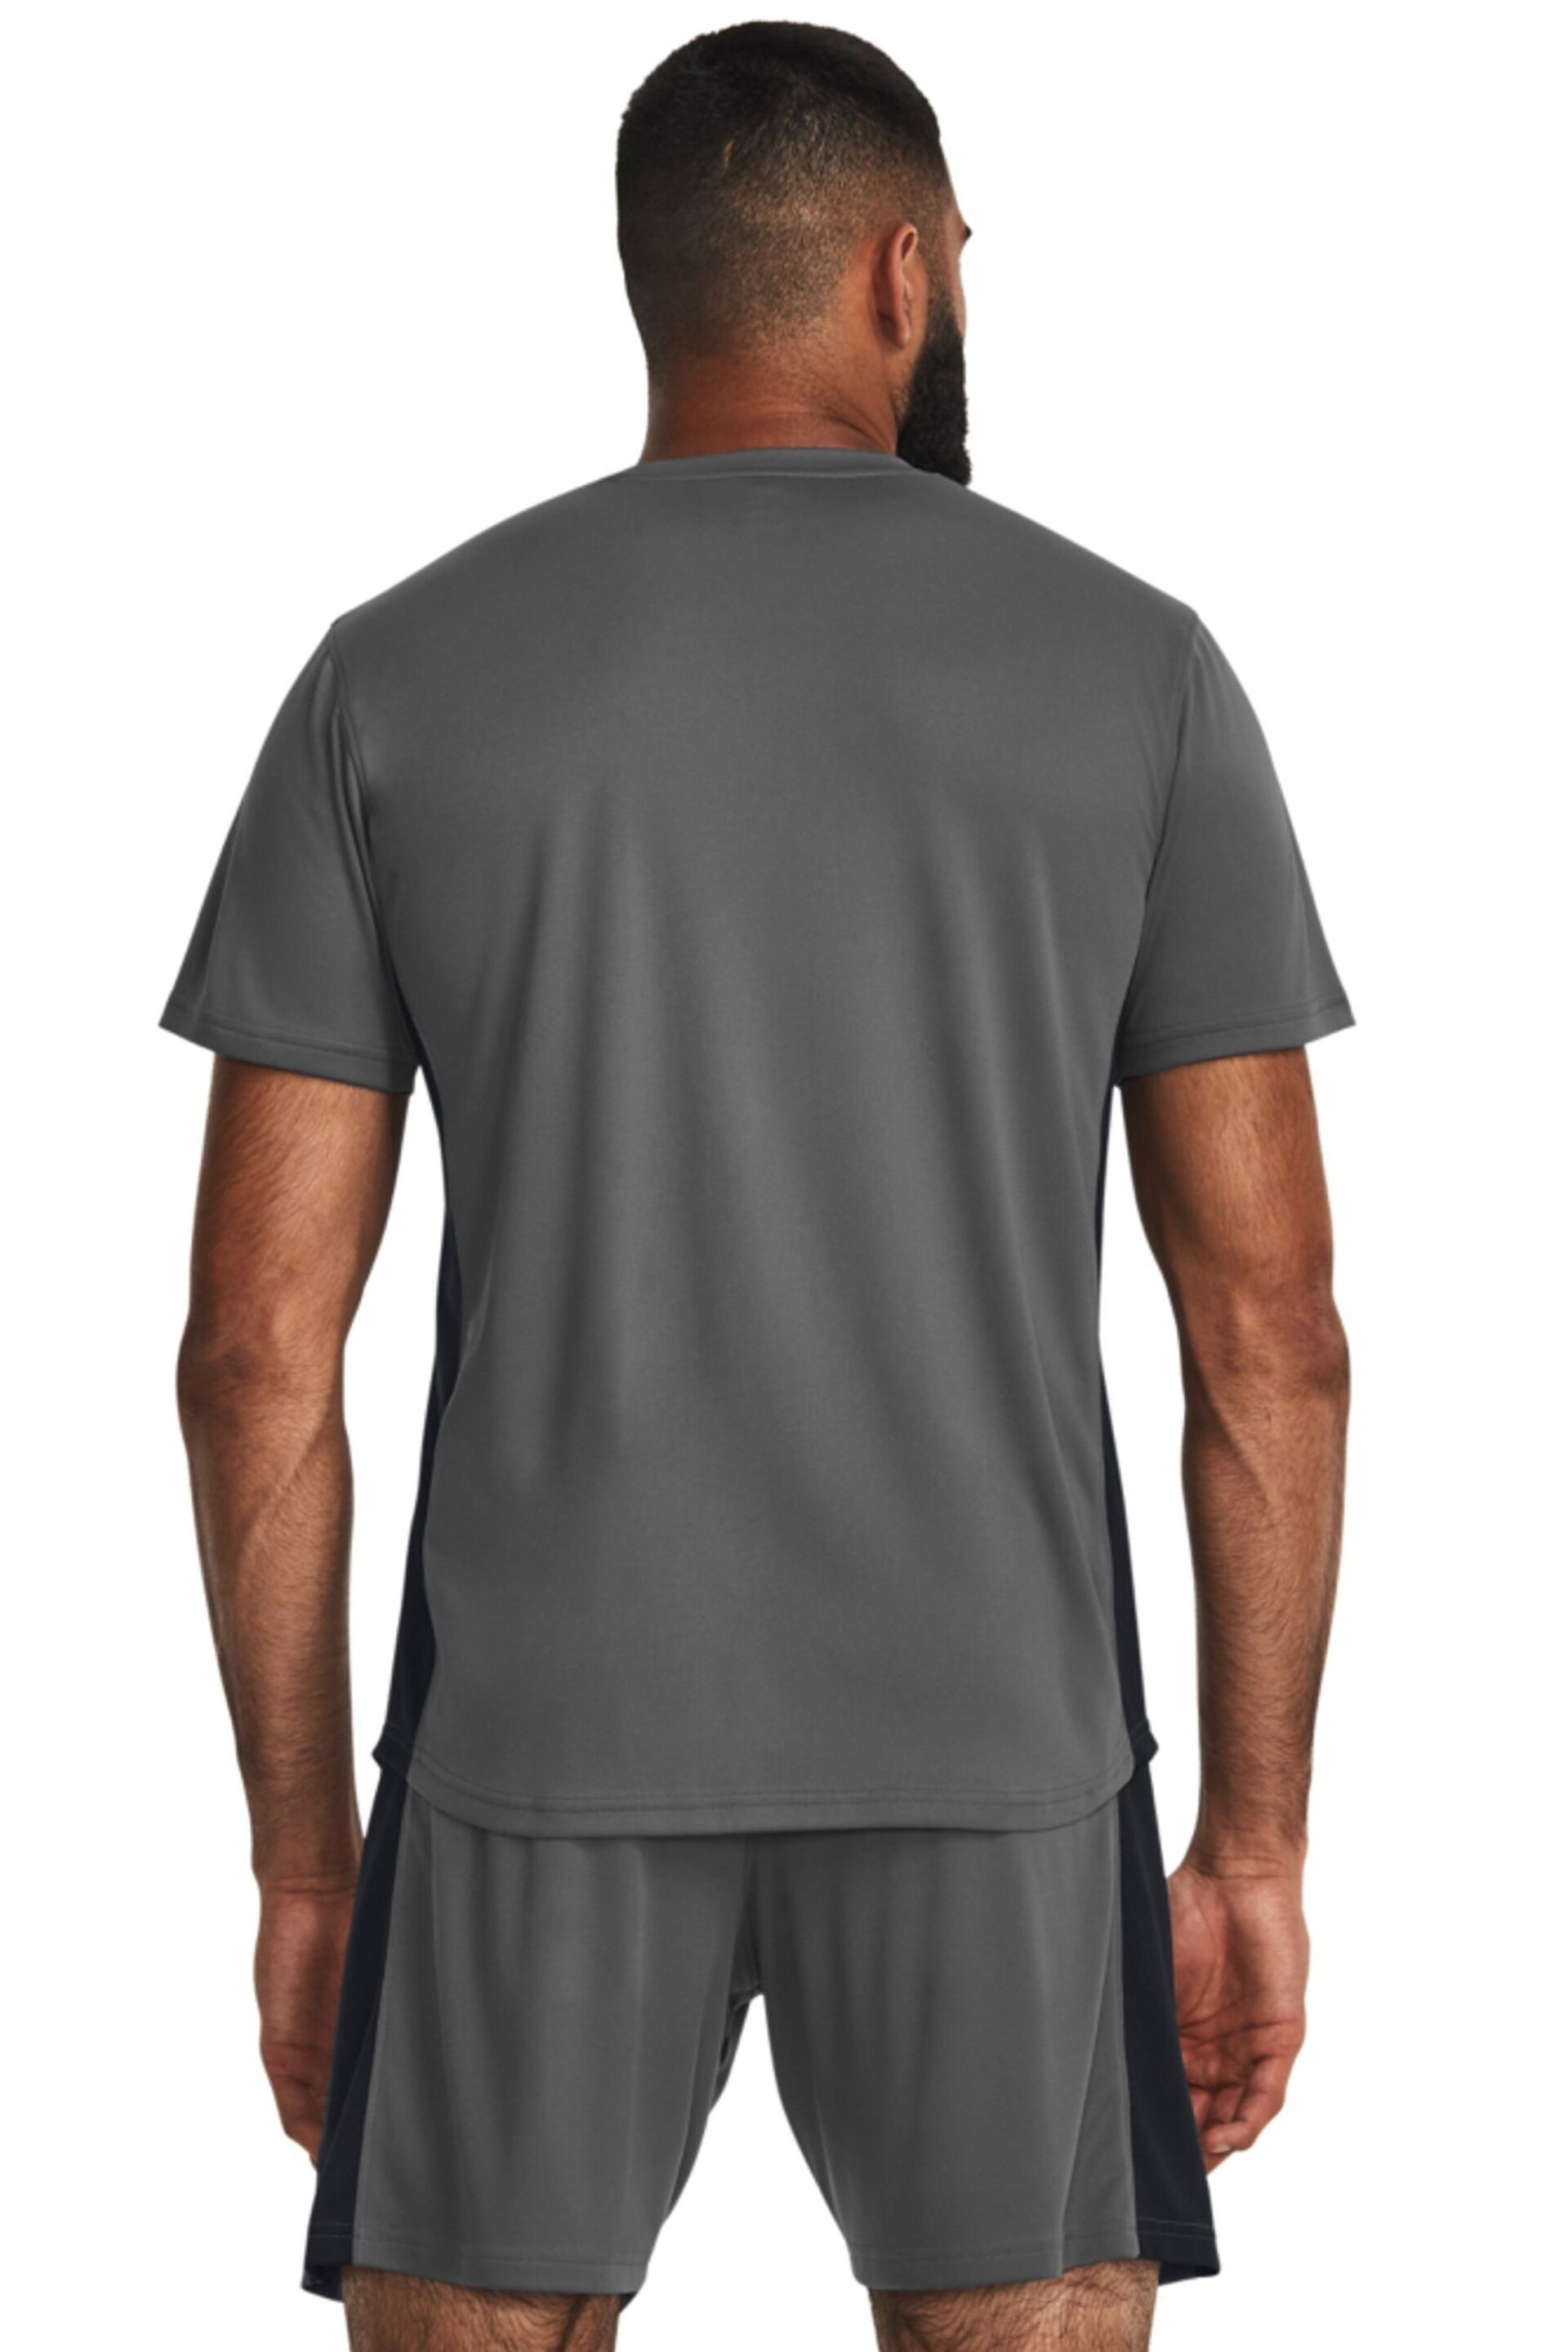 Under Armour Grey Challenger Train Short Sleeve T-Shirt - Image 2 of 6